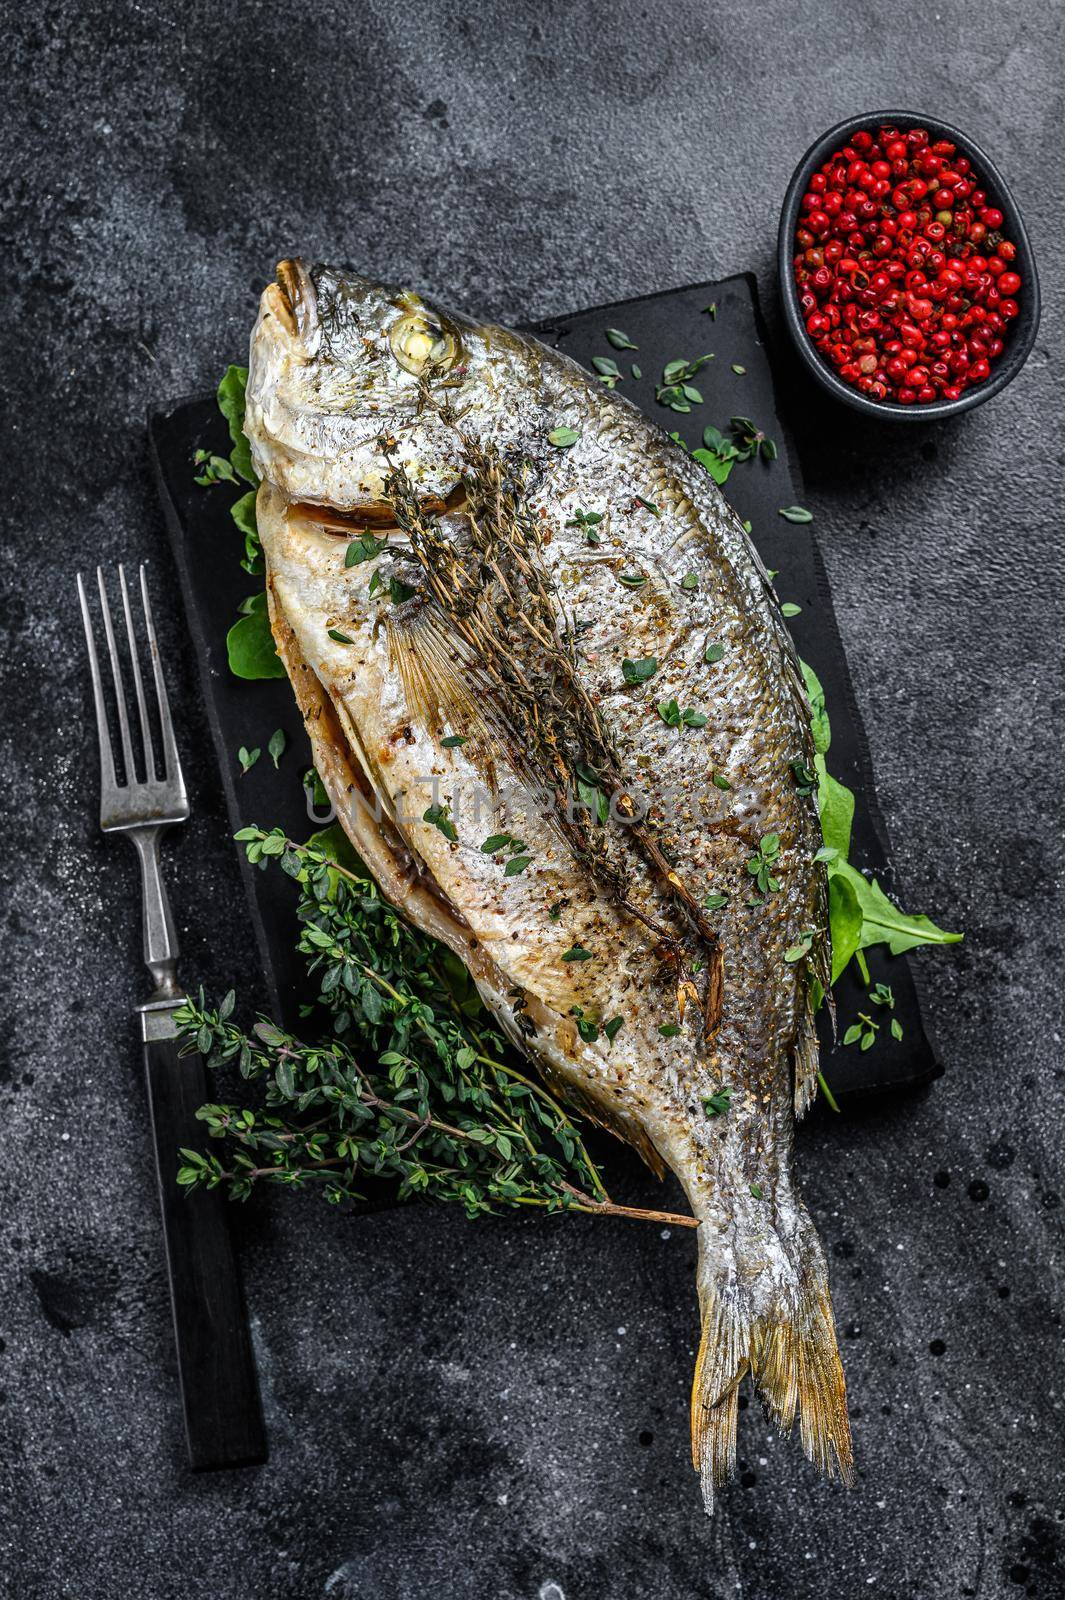 Roasted sea bream fish with herbs on a cutting board. Black background. Top view.